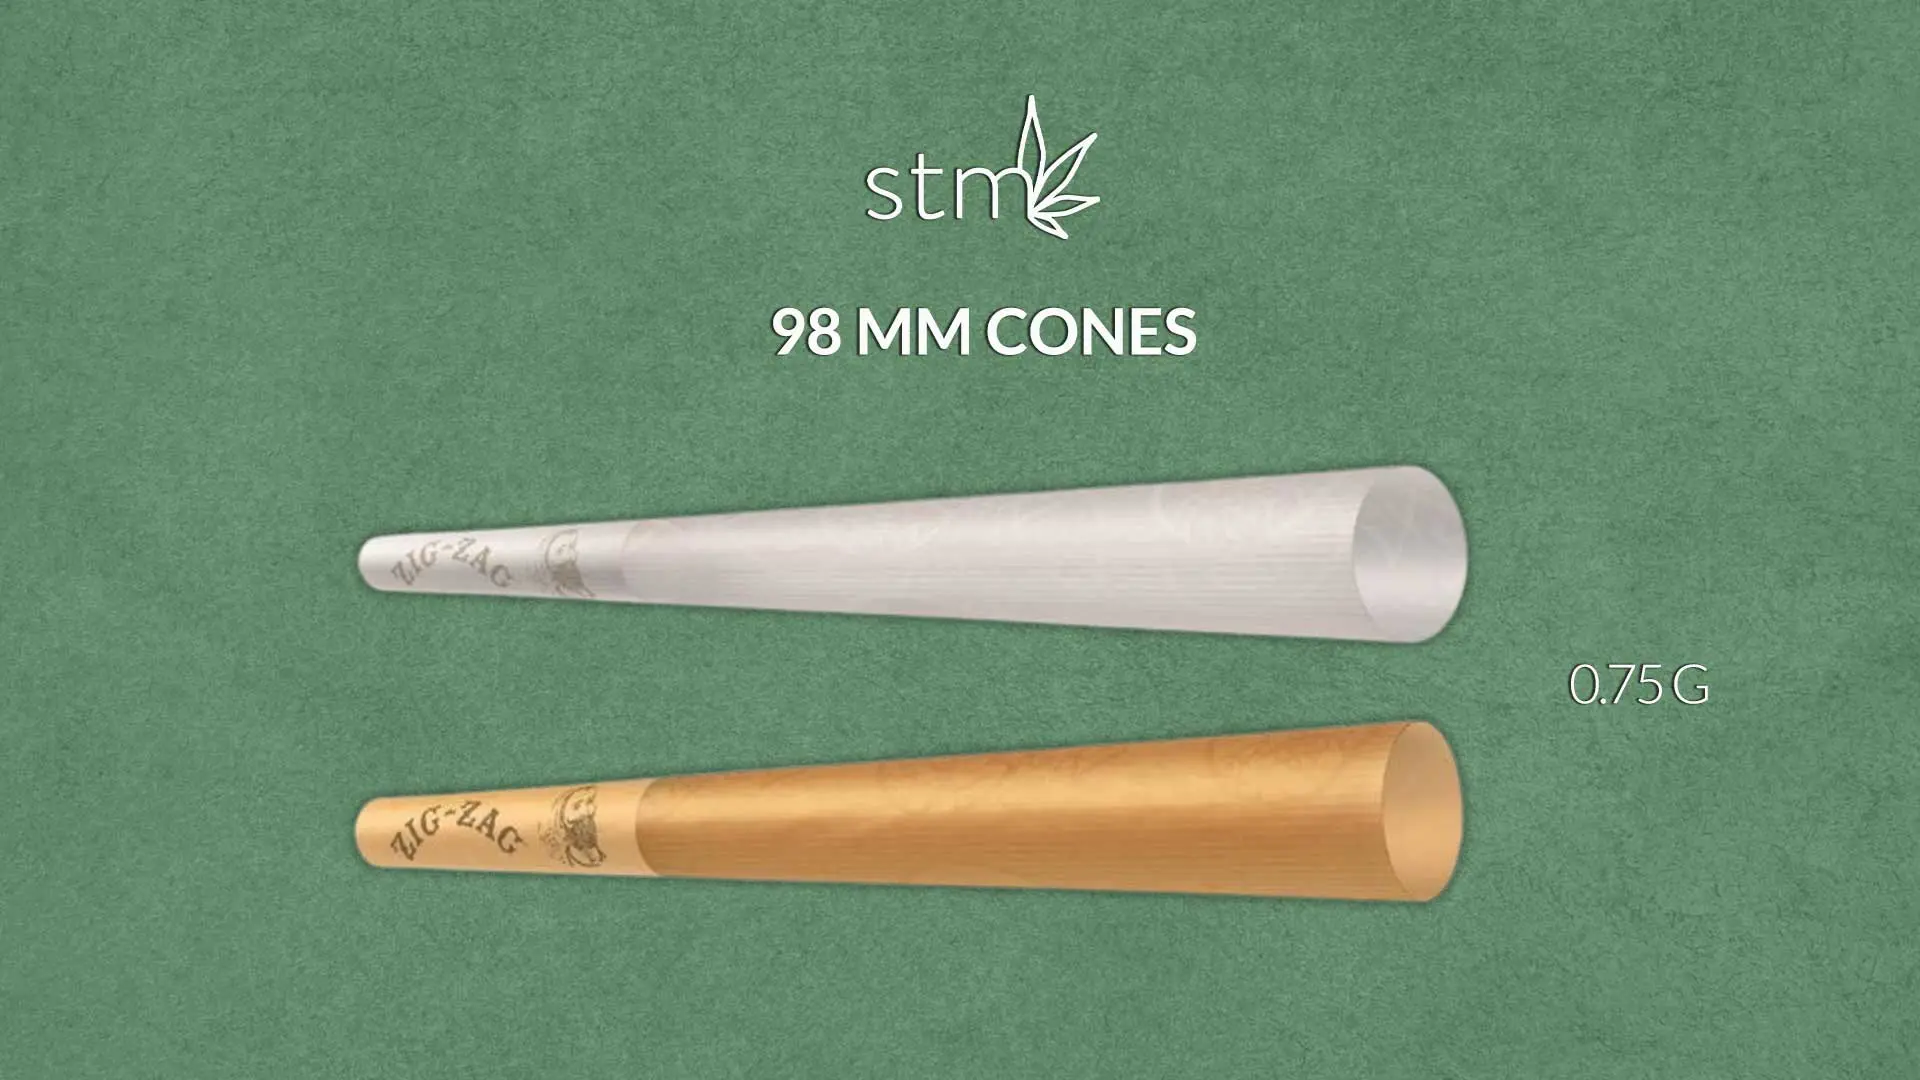 98mm cones for pre-rolls